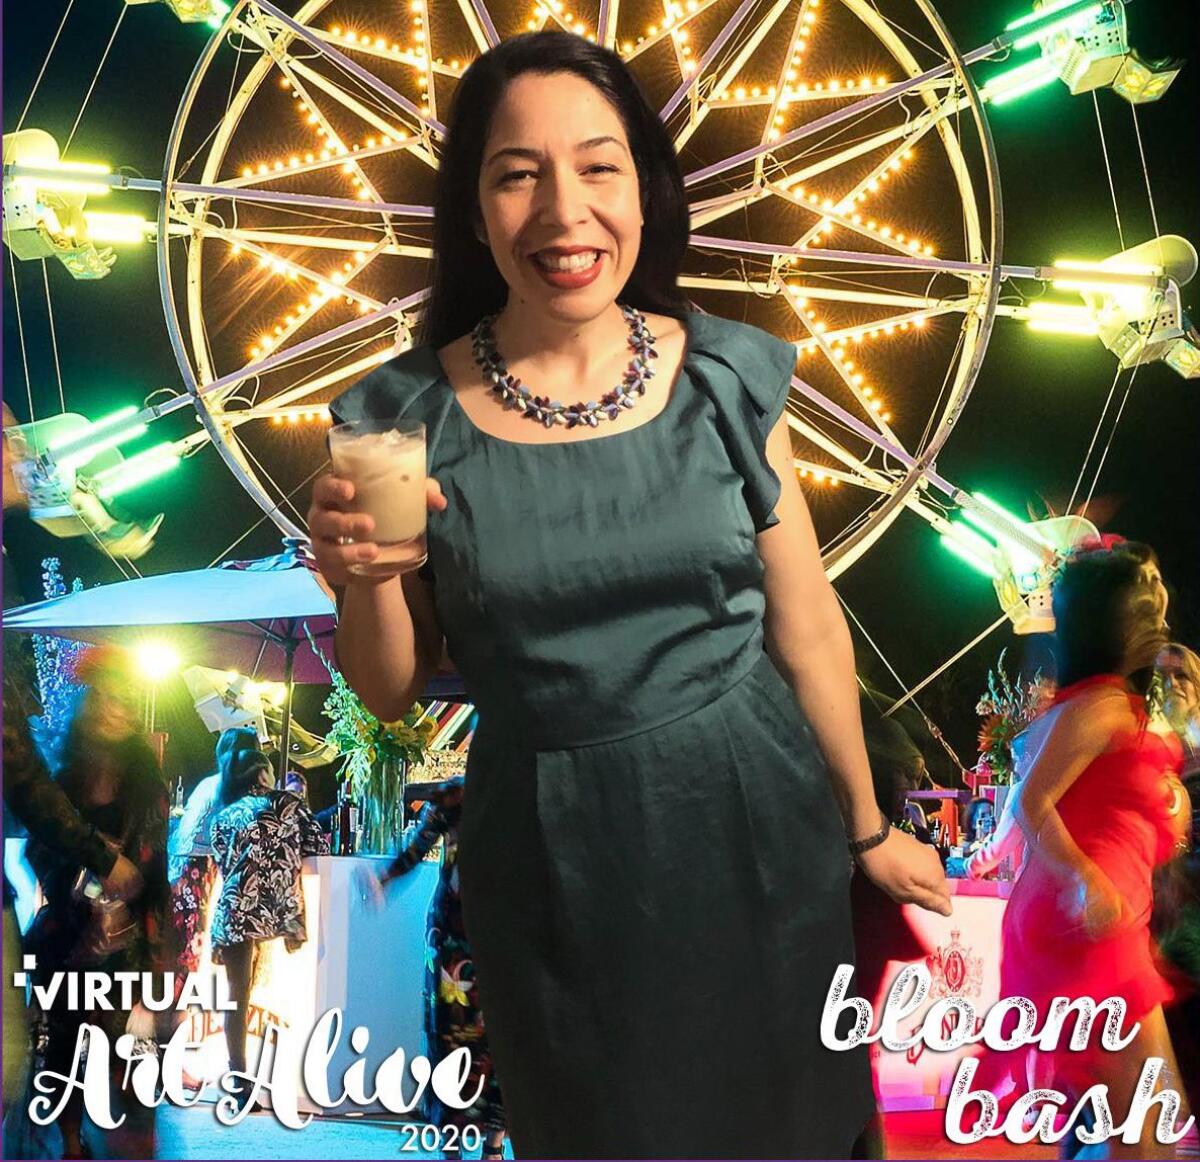 San Diego Museum of Art's Art Alive "Bloom Bash" is going virtual but people are invited to submit photos which will be superimposed on the party scenario via CEG Interactive's virtual photo booth.